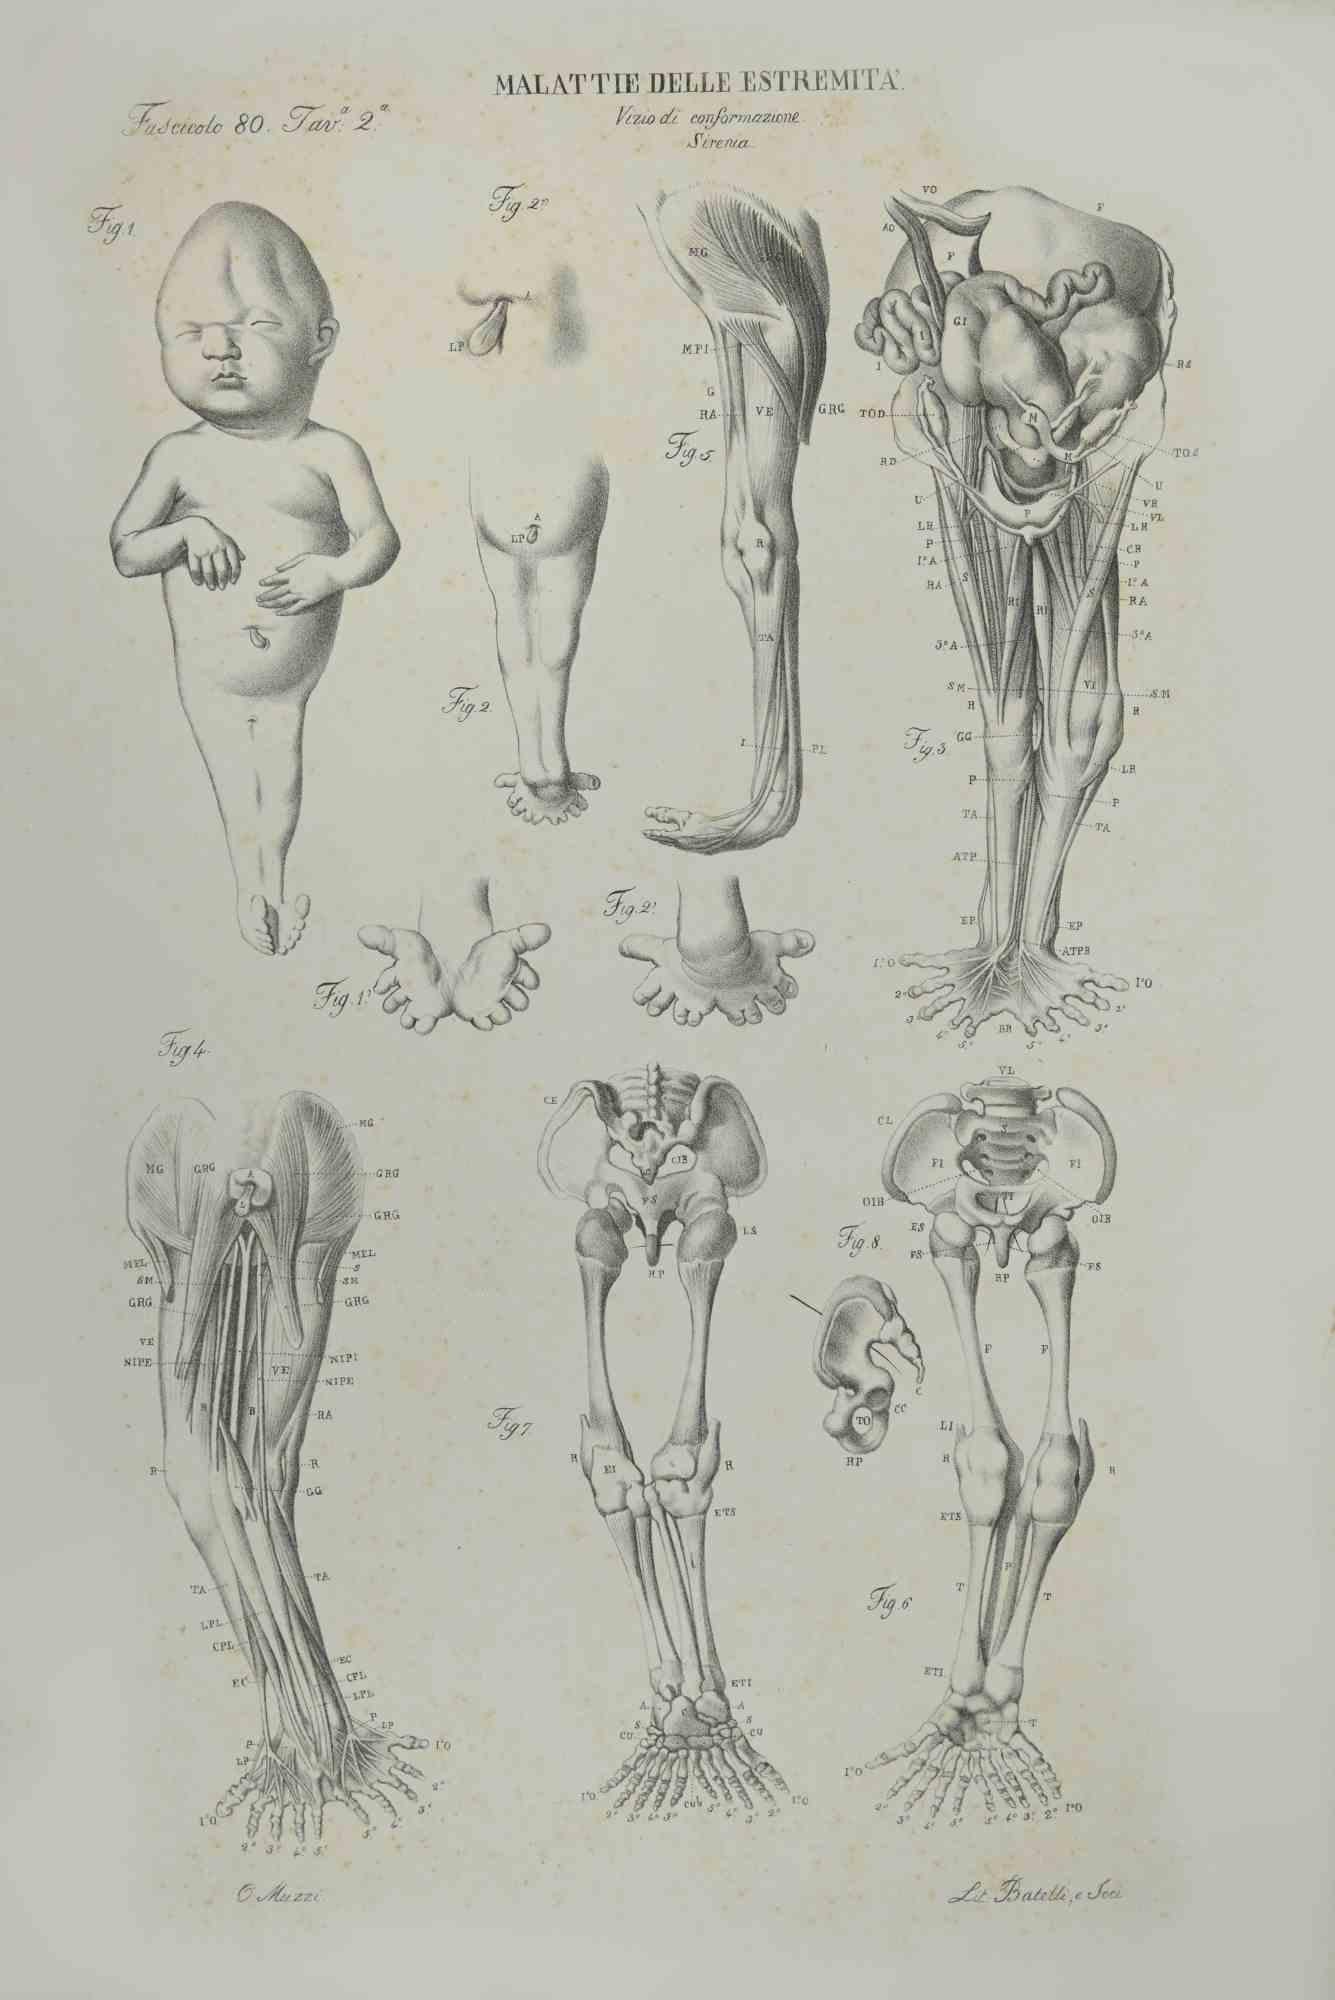 Diseases of Extremities is a lithograph hand colored by Ottavio Muzzi for the edition of Antoine Chazal, Human Anatomy, Printers Batelli and Ridolfi, 1843.

The work belongs to the Atlante generale della anatomia patologica del corpo umano by Jean